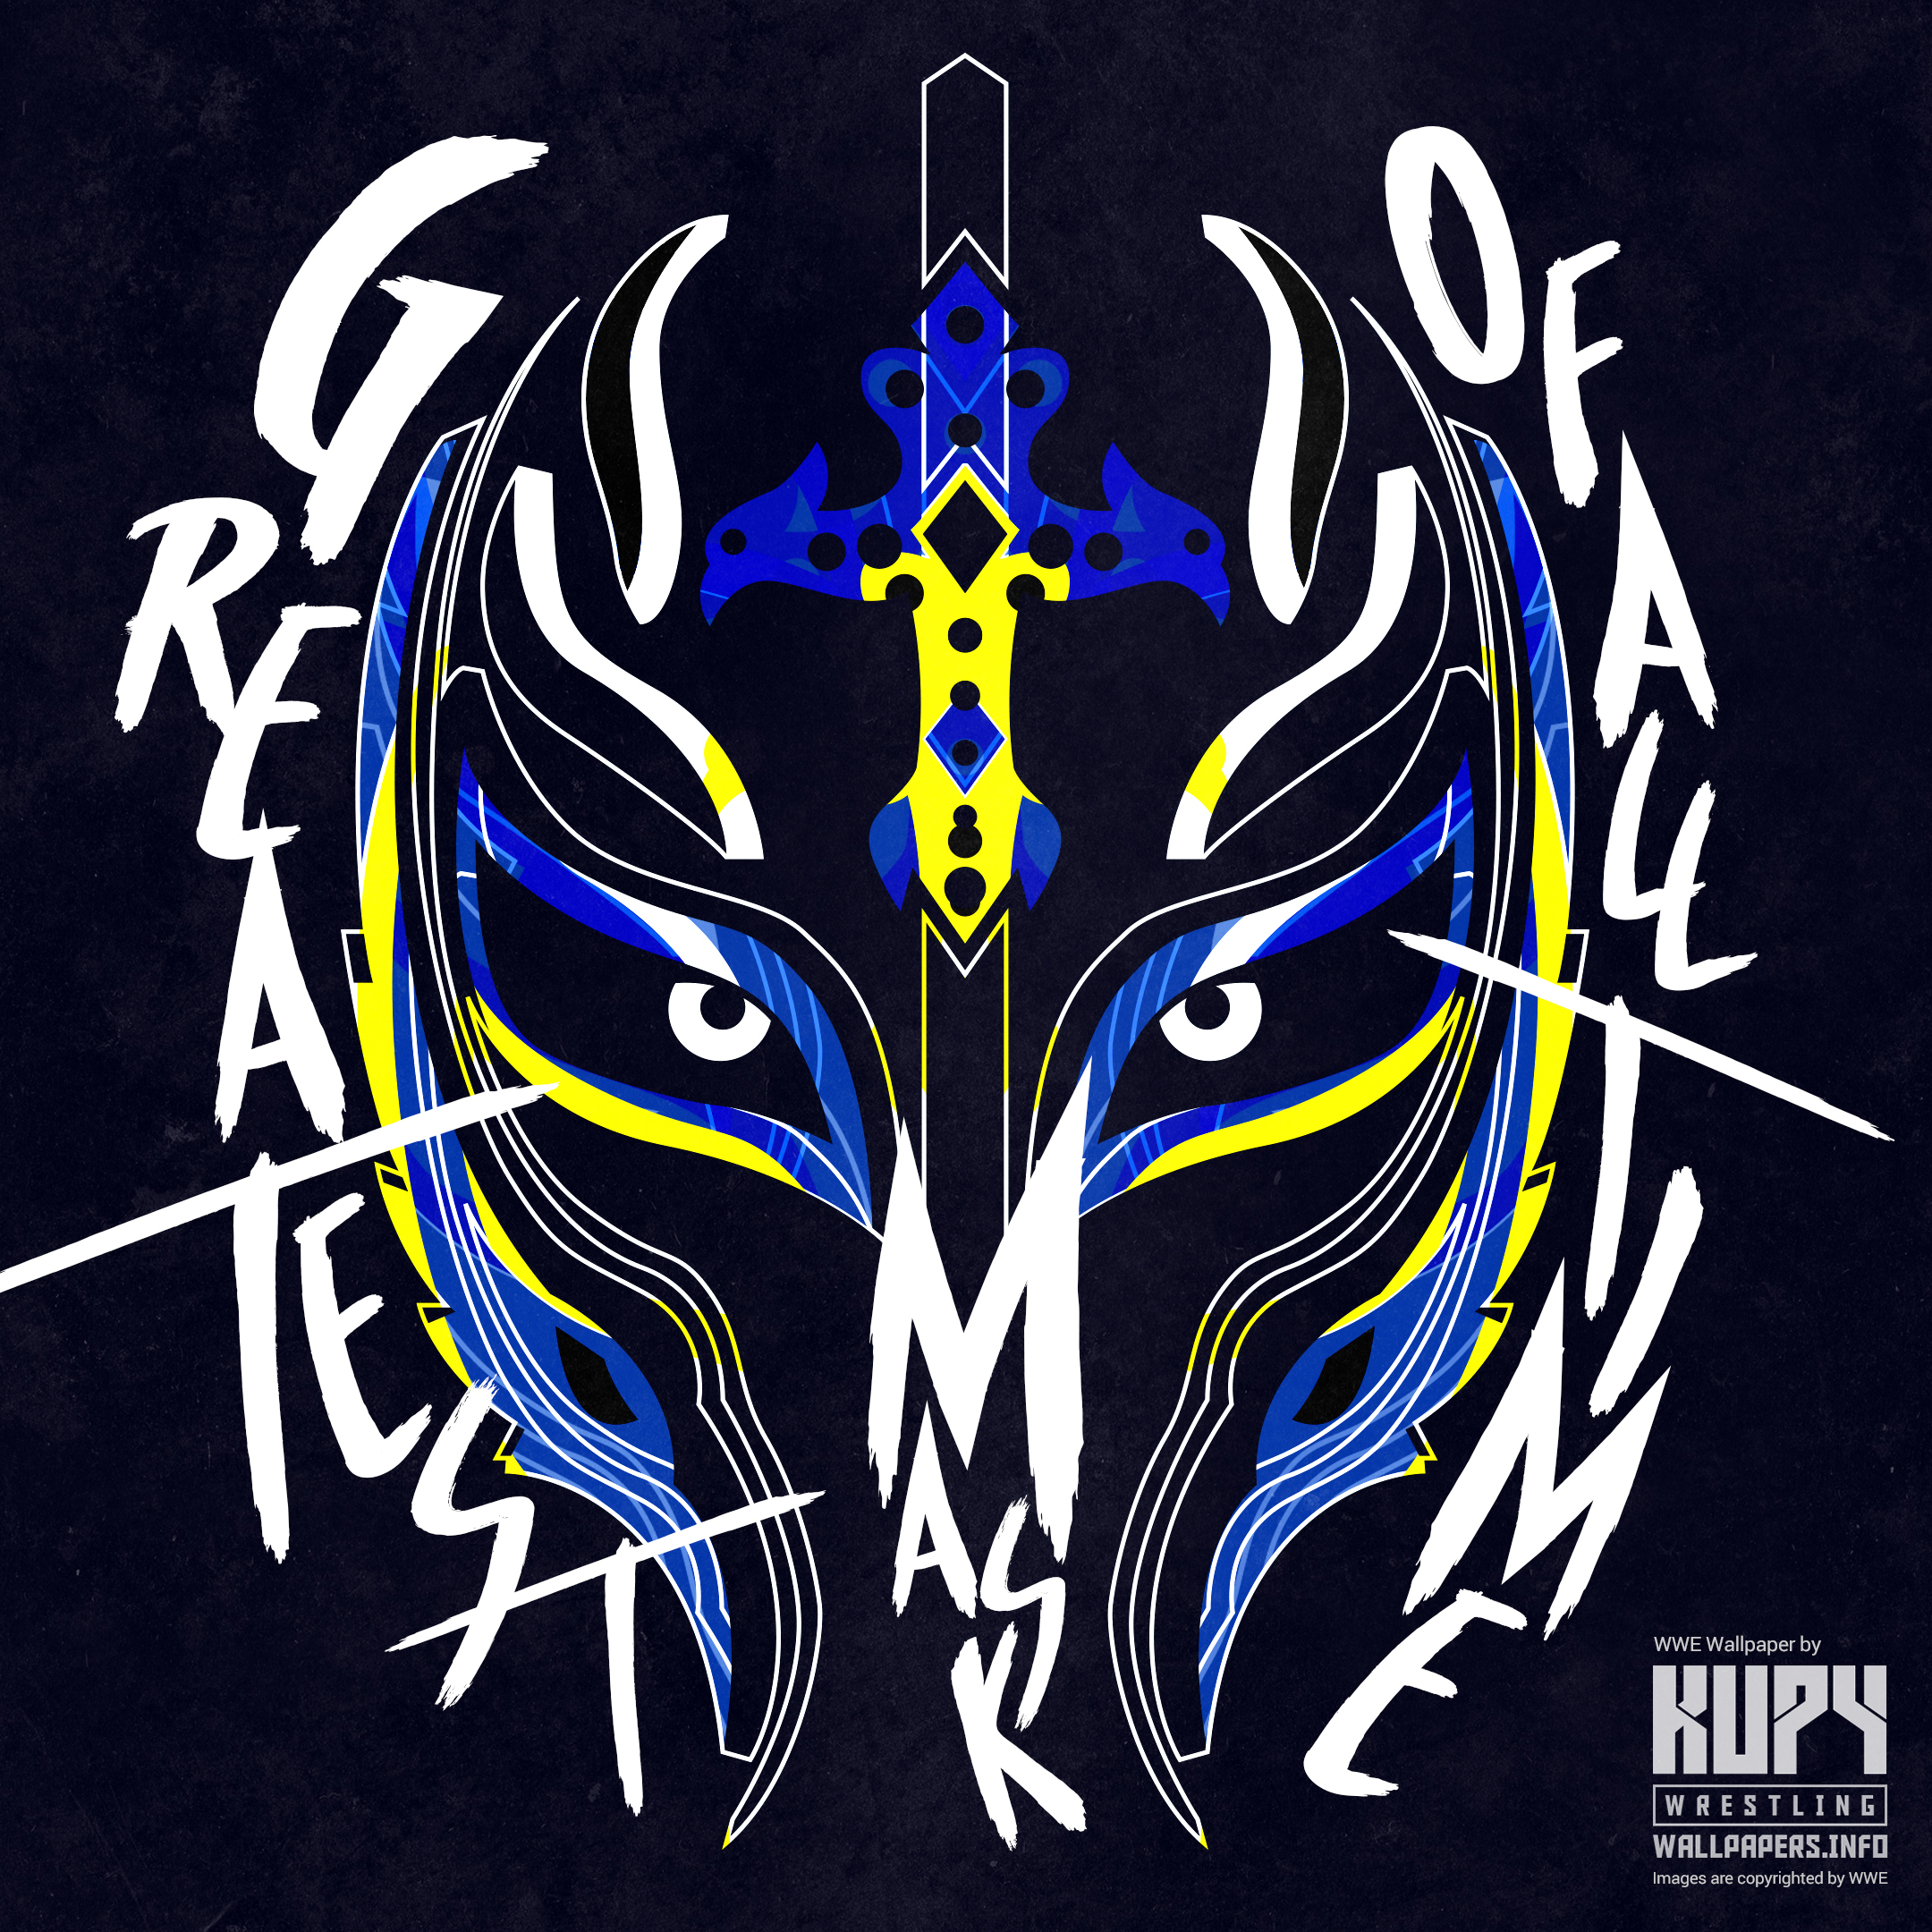 2160x2160 Rey Mysterio Archives Kupy Wrestling Wallpapers